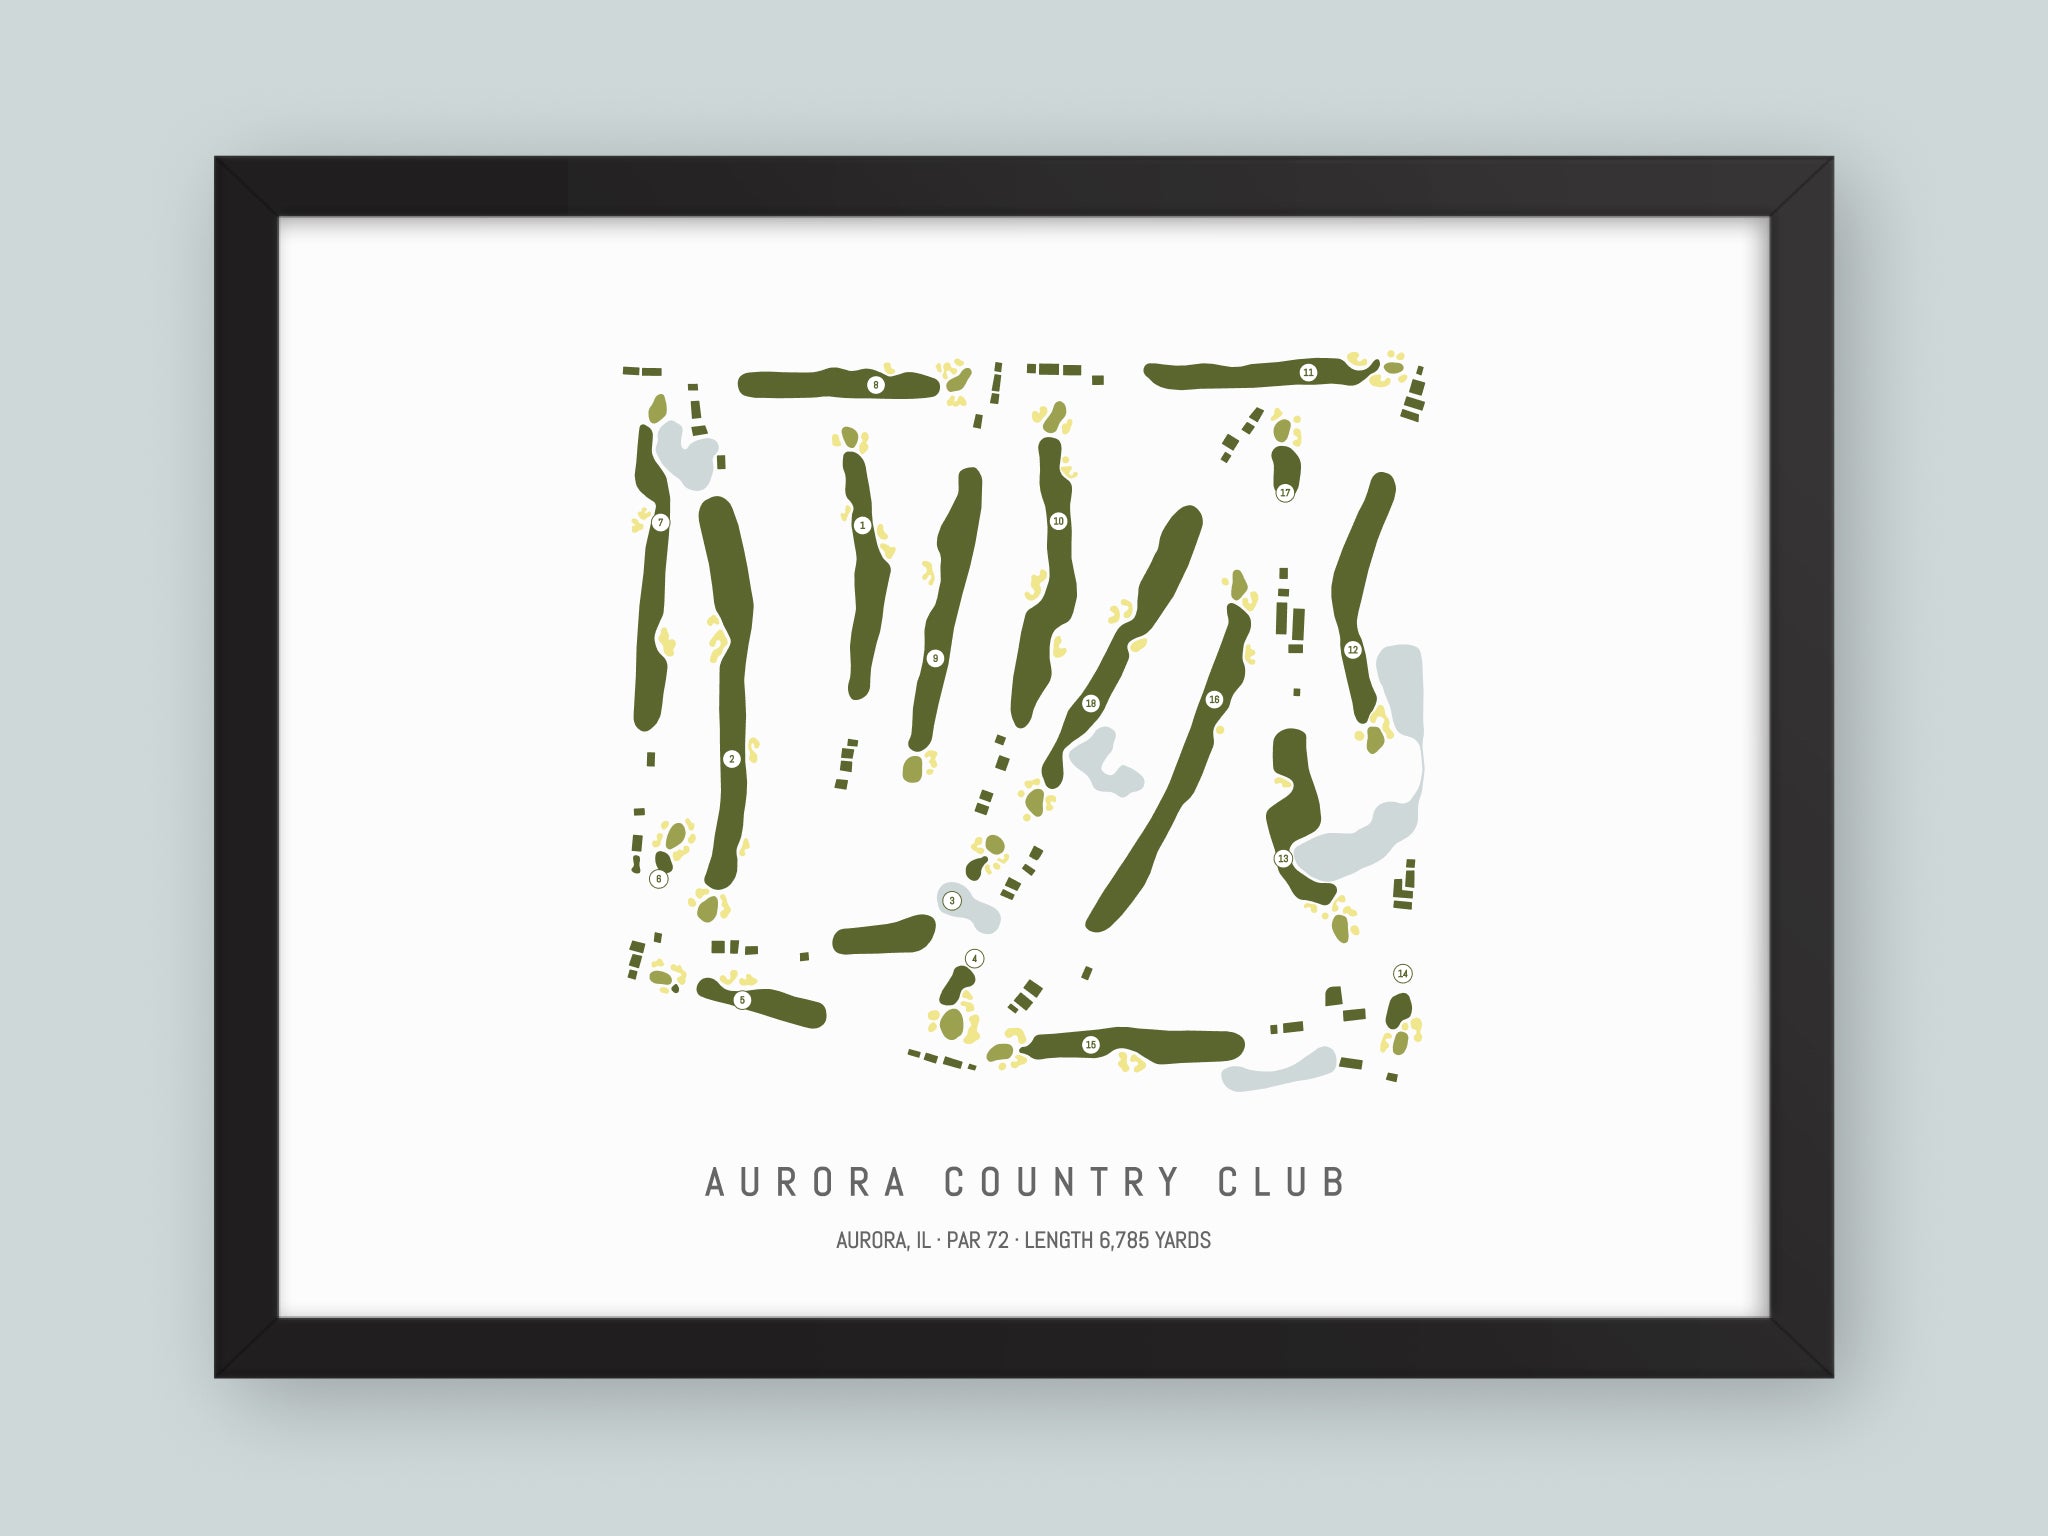 Aurora-Country-Club-IL--Black-Frame-24x18-With-Hole-Numbers